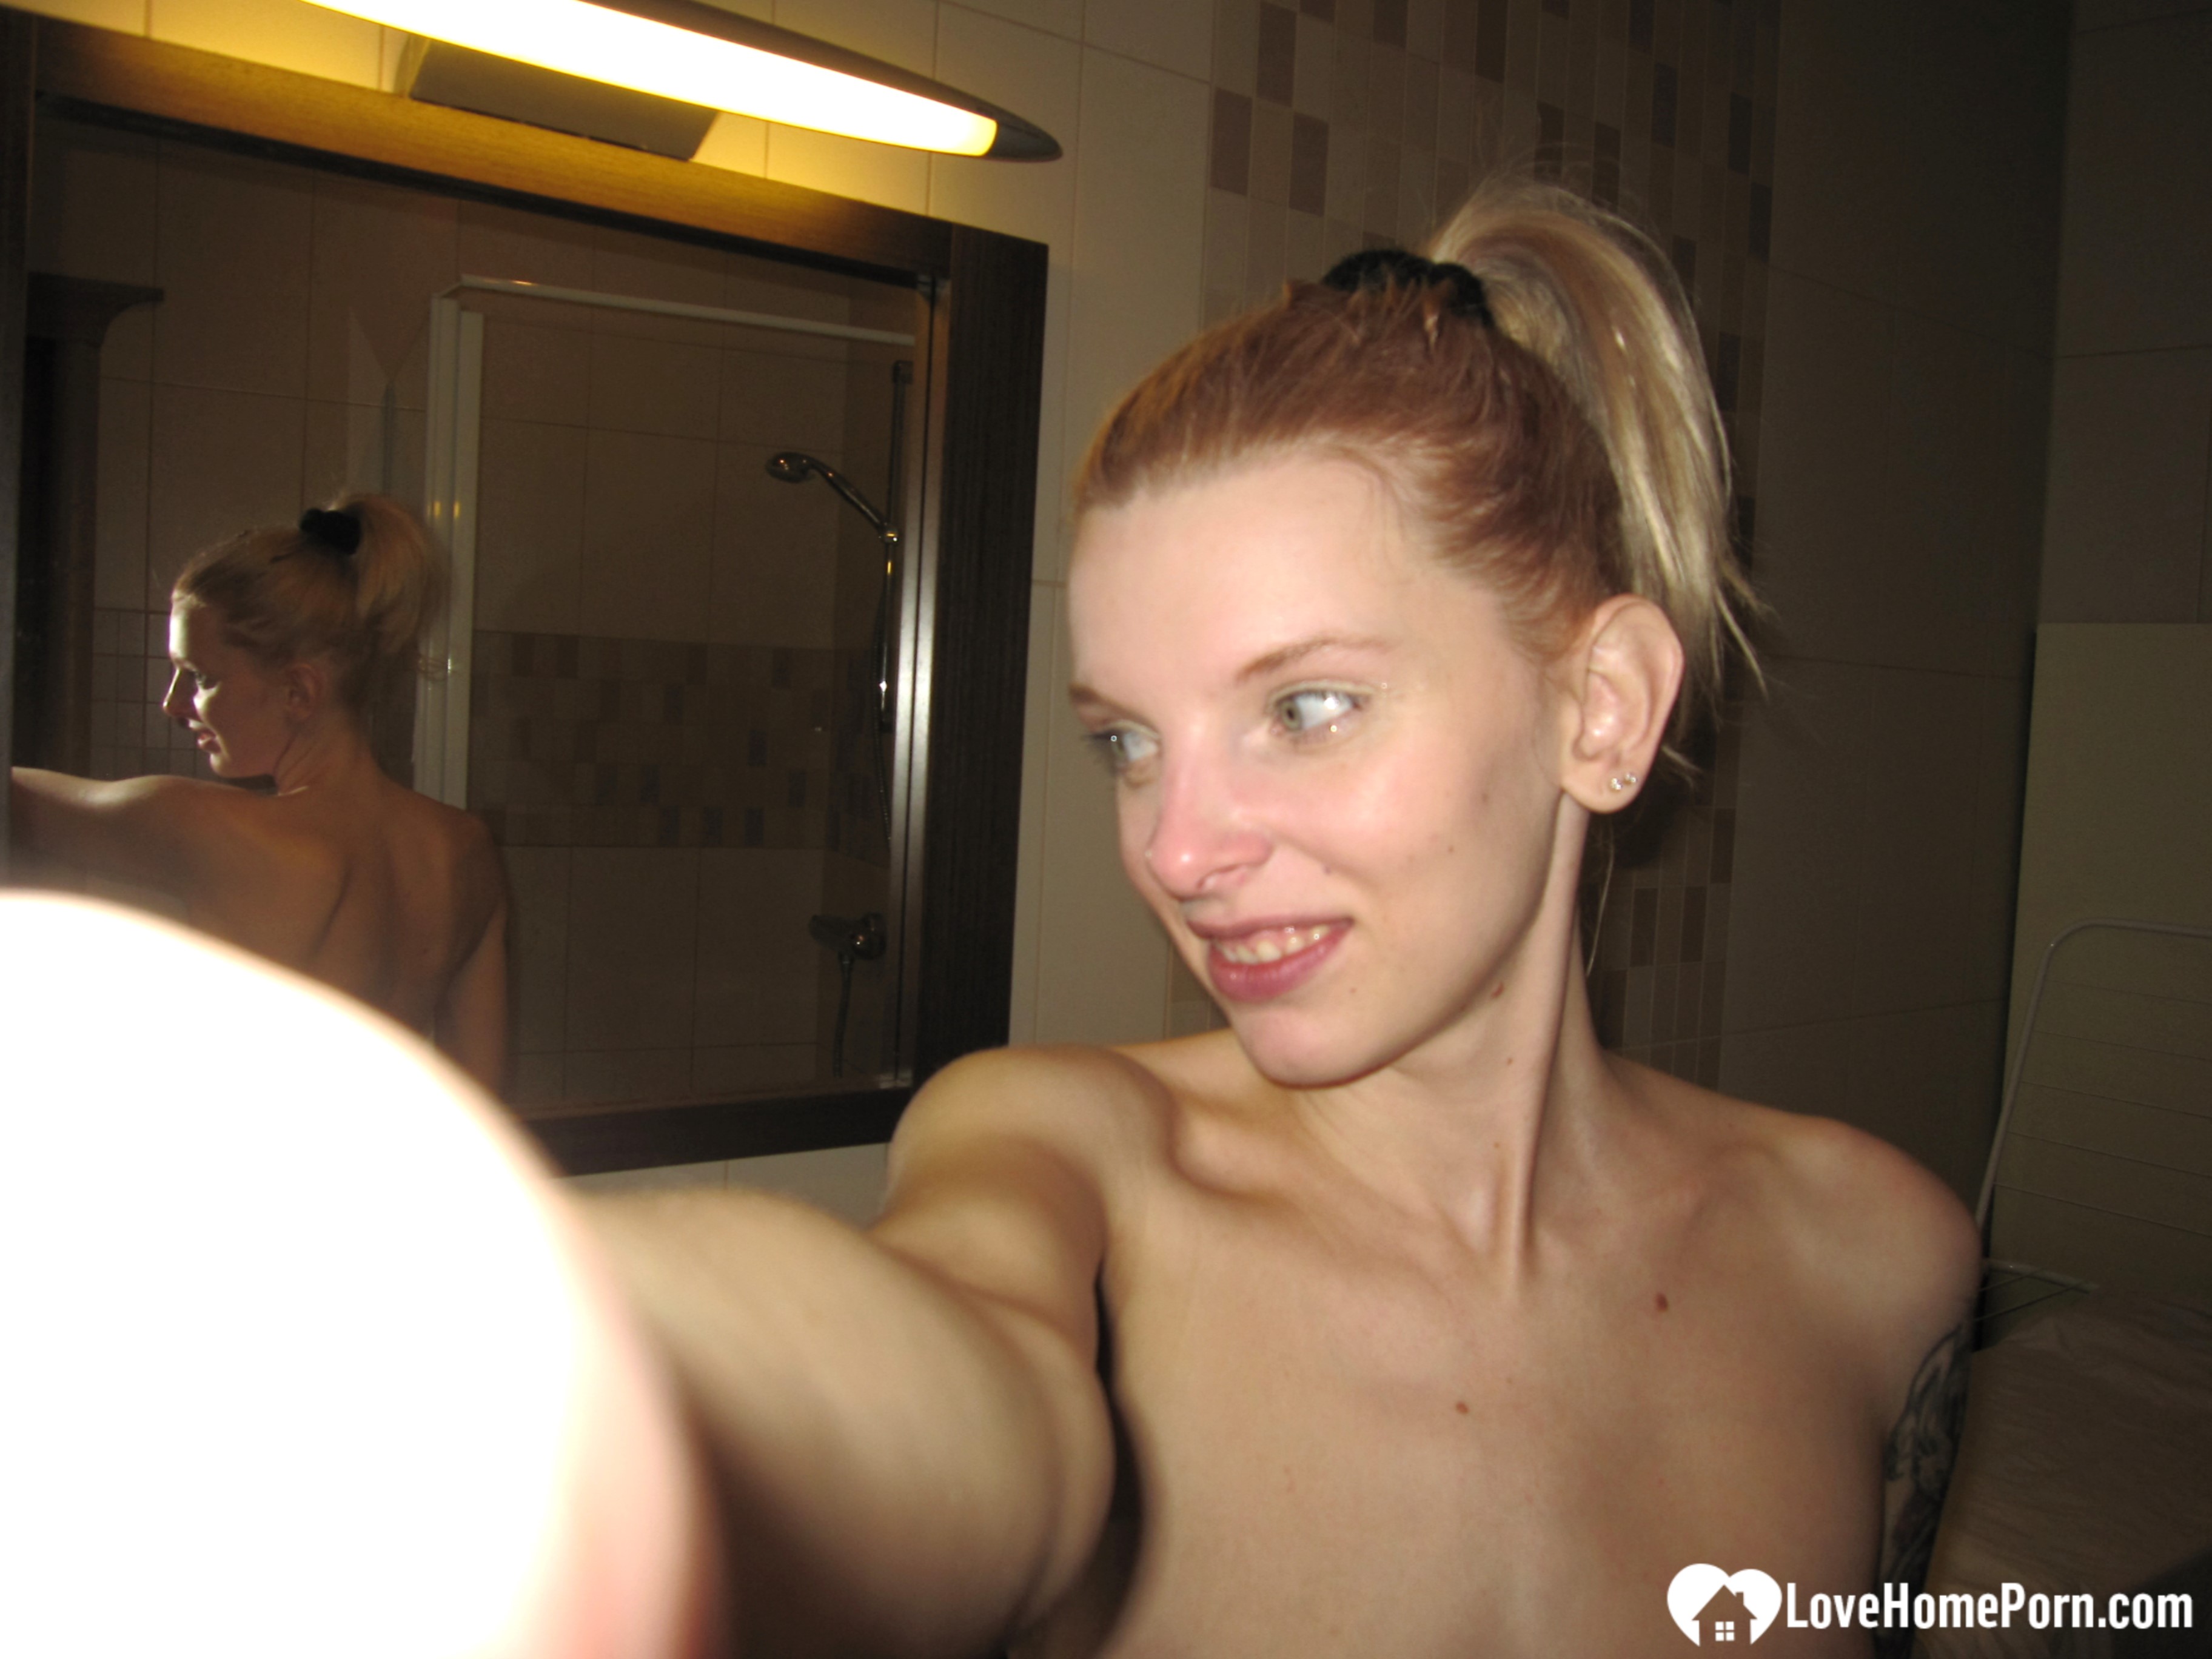 Exposing my ex-girlfriends naked selfies for pic